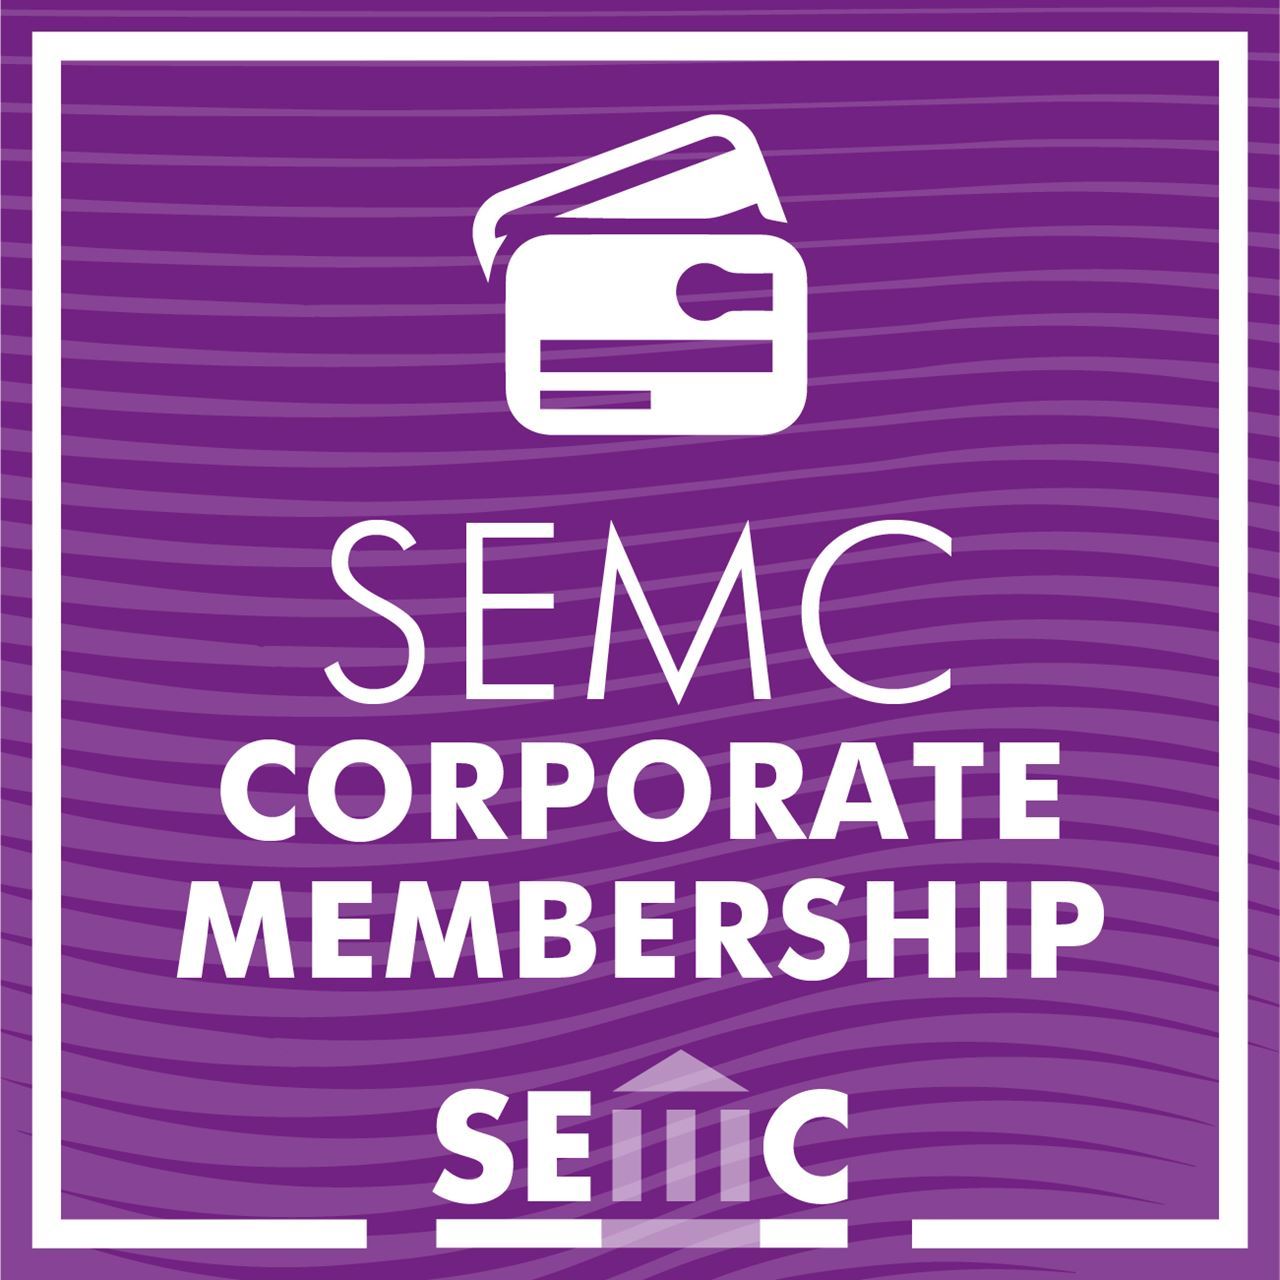 A striped, purple background, with a graphic of cards and the words “SEMC Corporate Membership” are centered. The SEMC logo is also at the bottom.